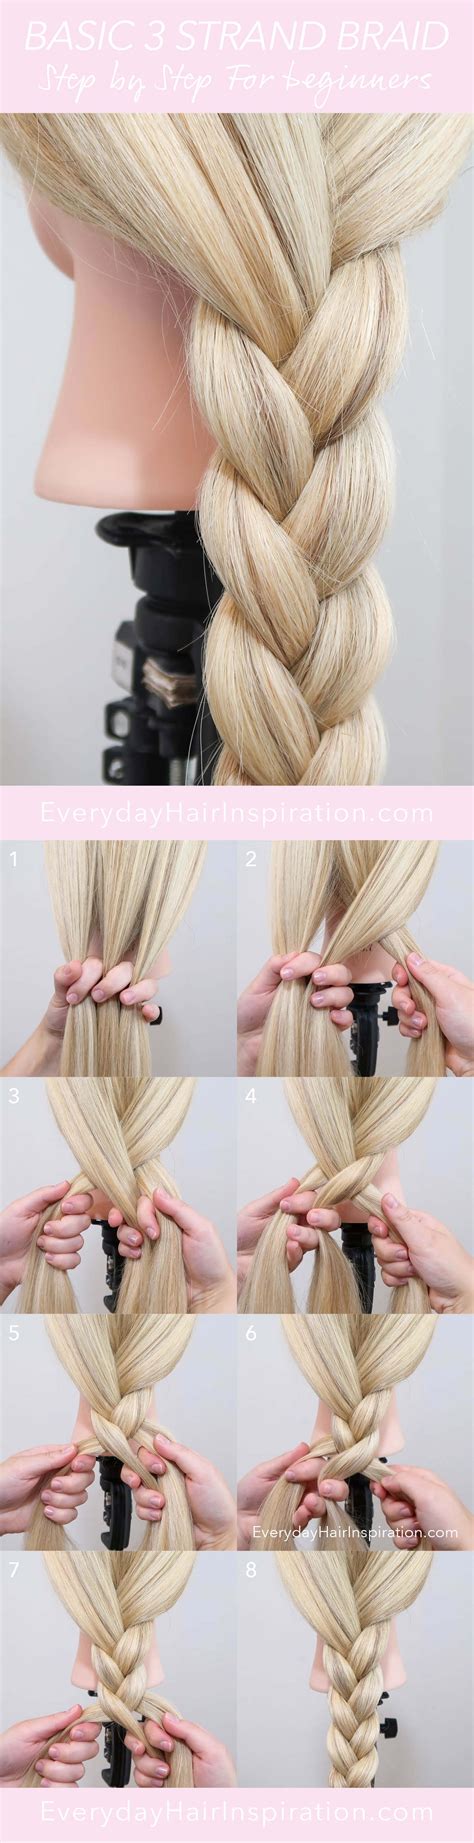 Unique How To Plait Hair Step By Step Hairstyles Inspiration